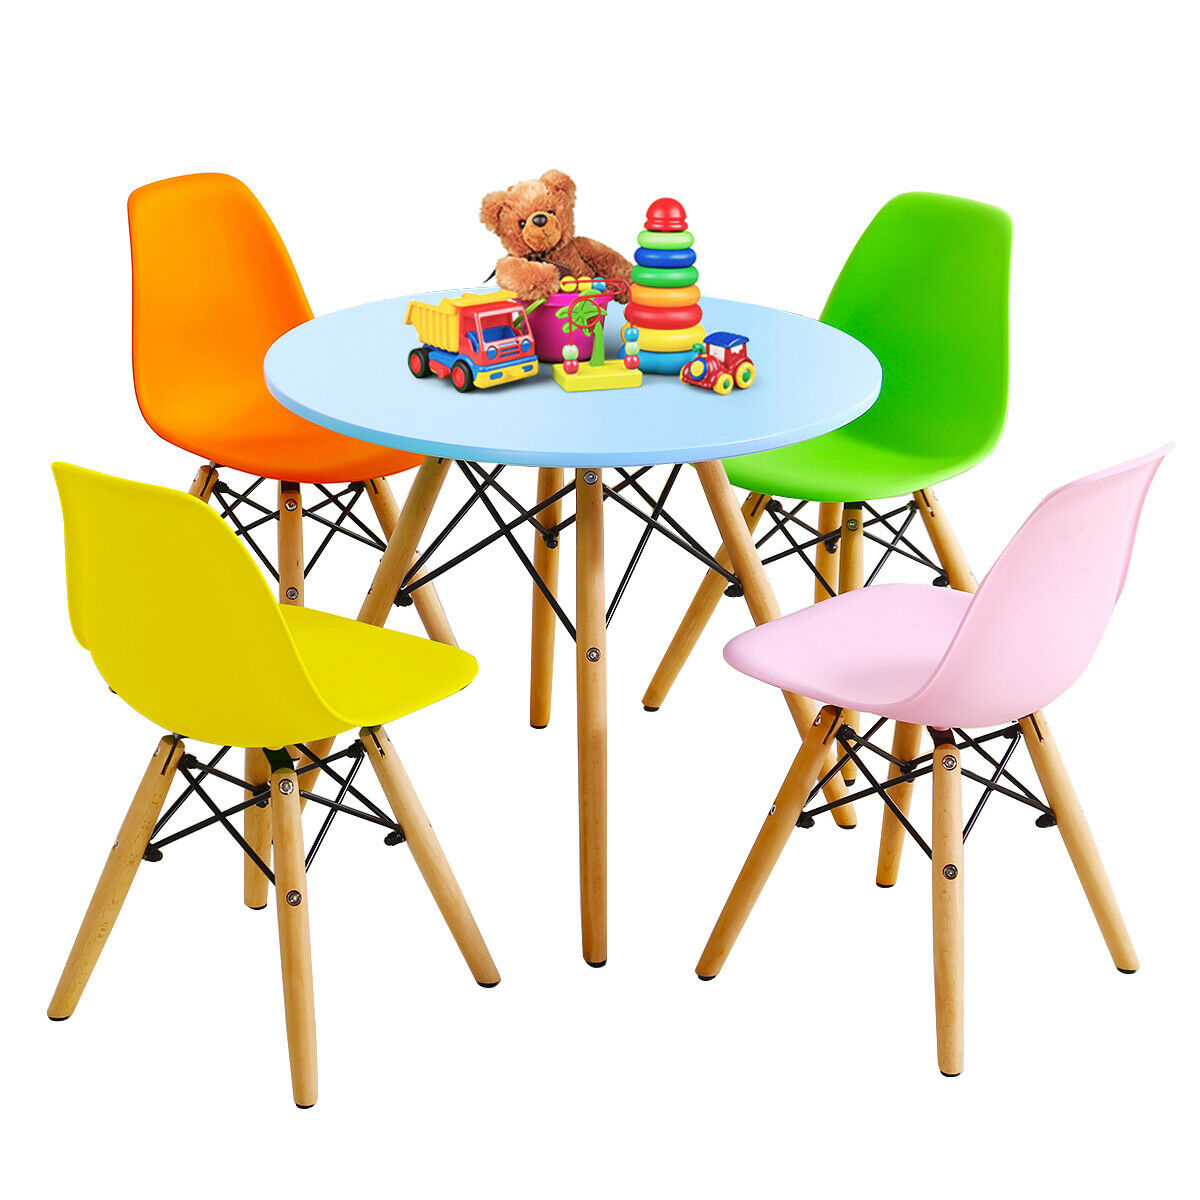 5 PC Kids Colorful Round Table Chair Set W/ 4 Armless Chairs